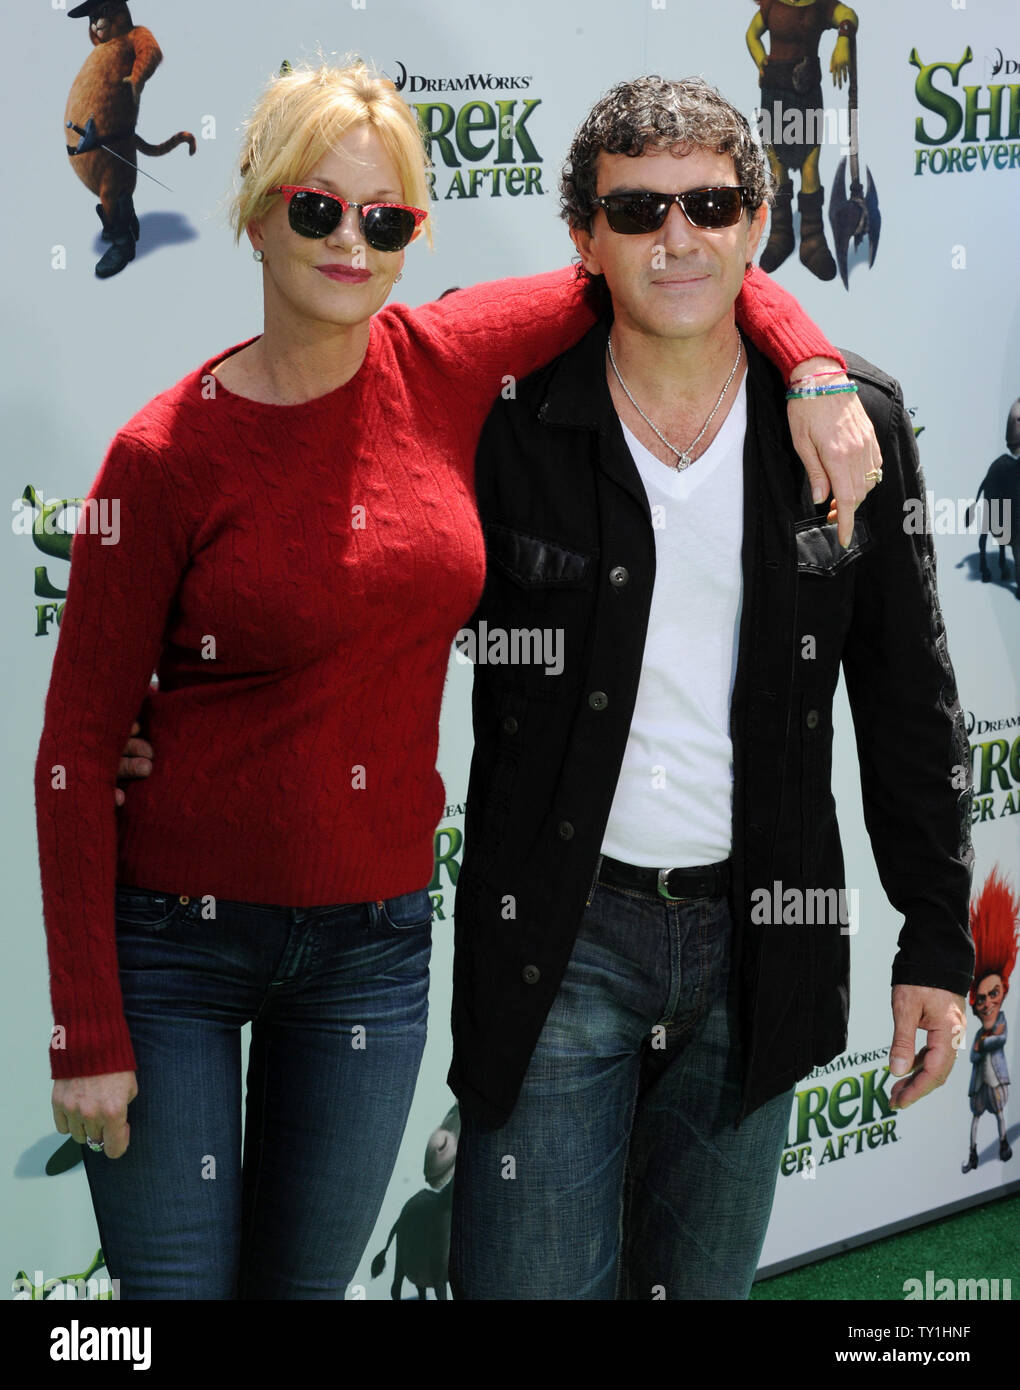 Spanish actor Antonio Banderas (R), the voice of Puss and Boots in the animated motion picture comedy 'Shrek Forever After', attends the premiere of the film with his wife, actress Melanie Griffith in Los Angeles on May 16, 2010.     UPI/Jim Ruymen Stock Photo